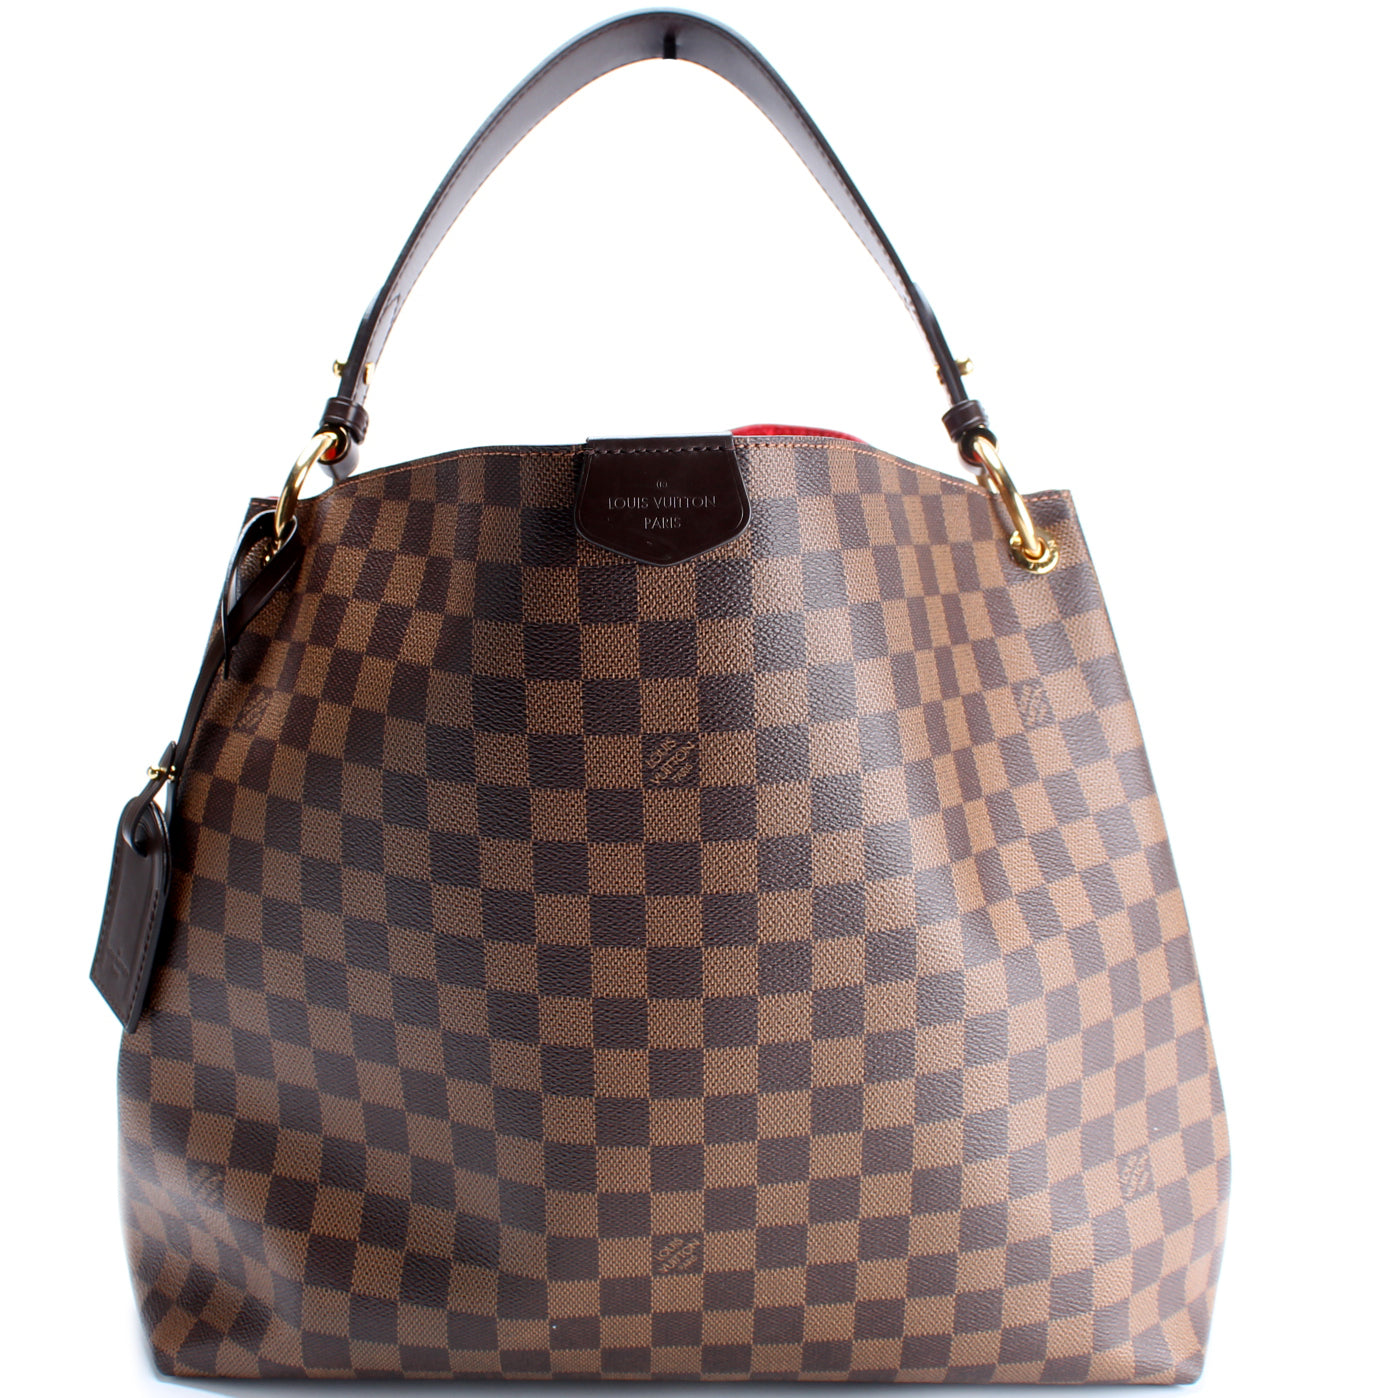 Brand New Louis Vuitton Graceful MM with added strap for Sale in